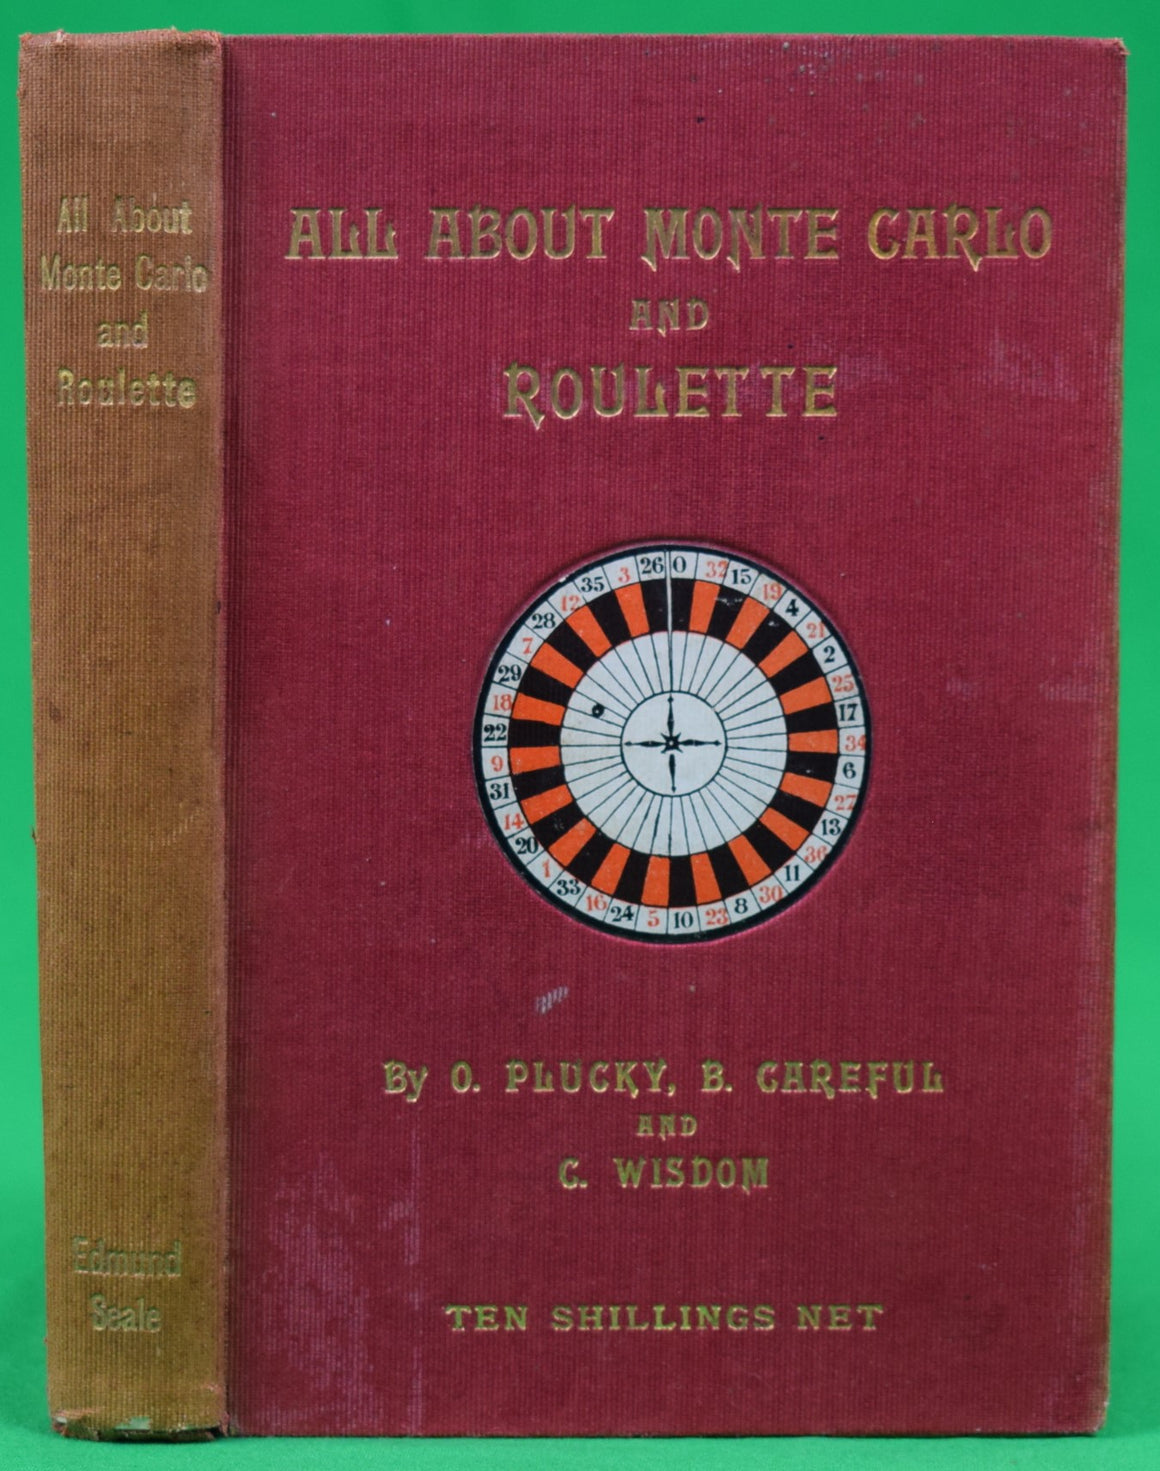 "All About Monte Carlo And Roulette" 1913 PLUCKY, O., CAREFUL, B. & WISDOM, C.